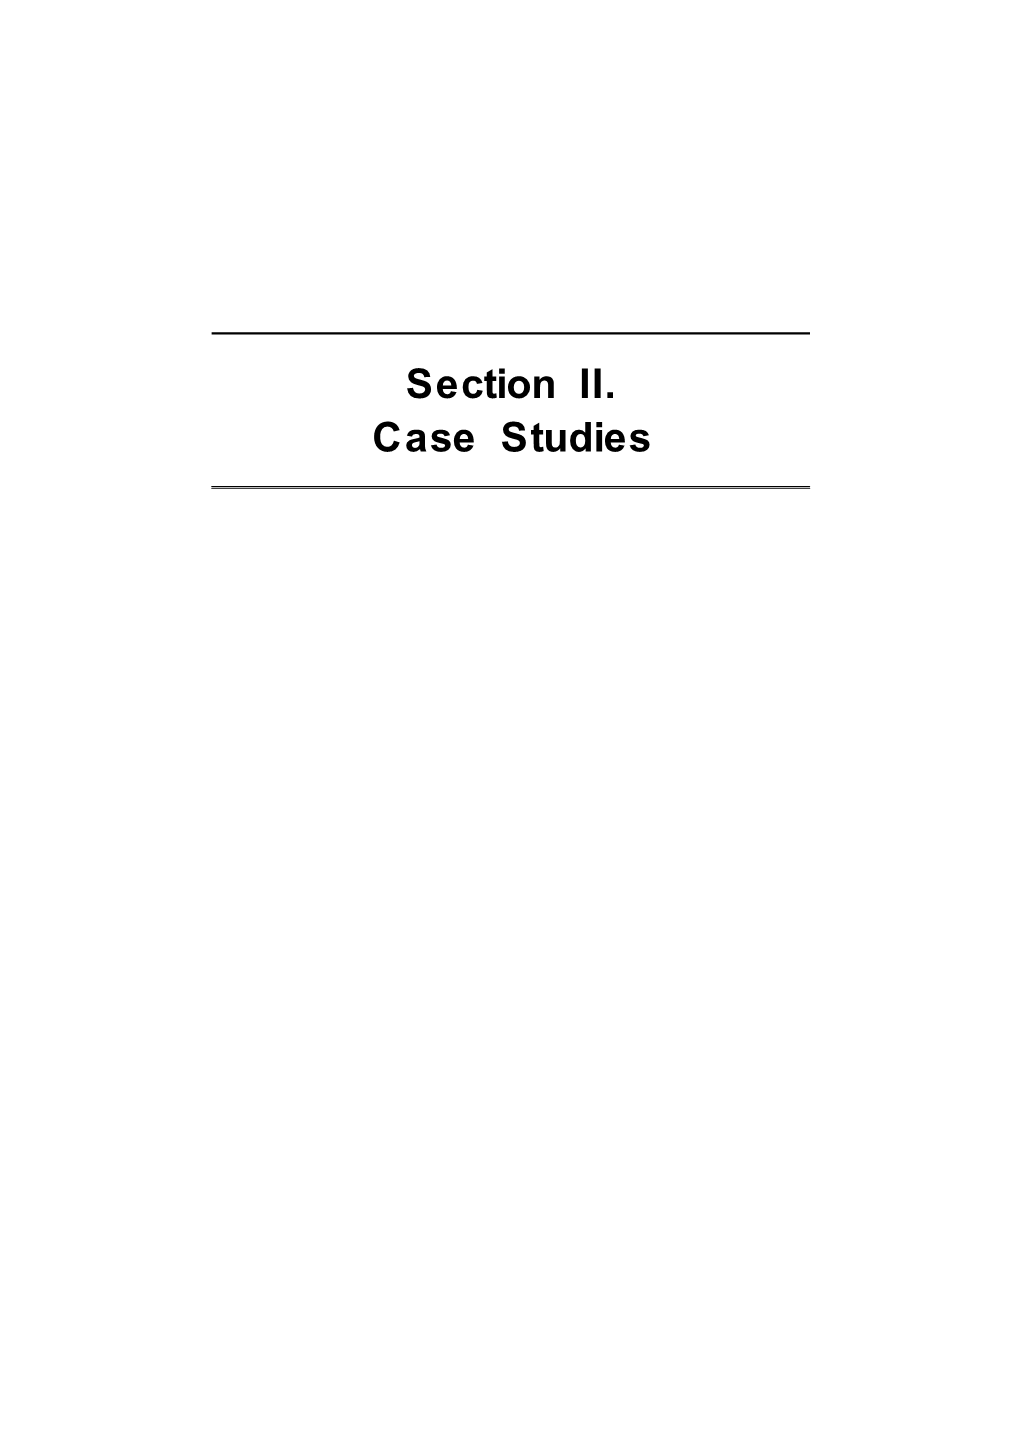 Section II. Case Studies This Section Presents an In�Depth Analysis of Ten Trade Product Groups Between Korea and ASEAN Countries